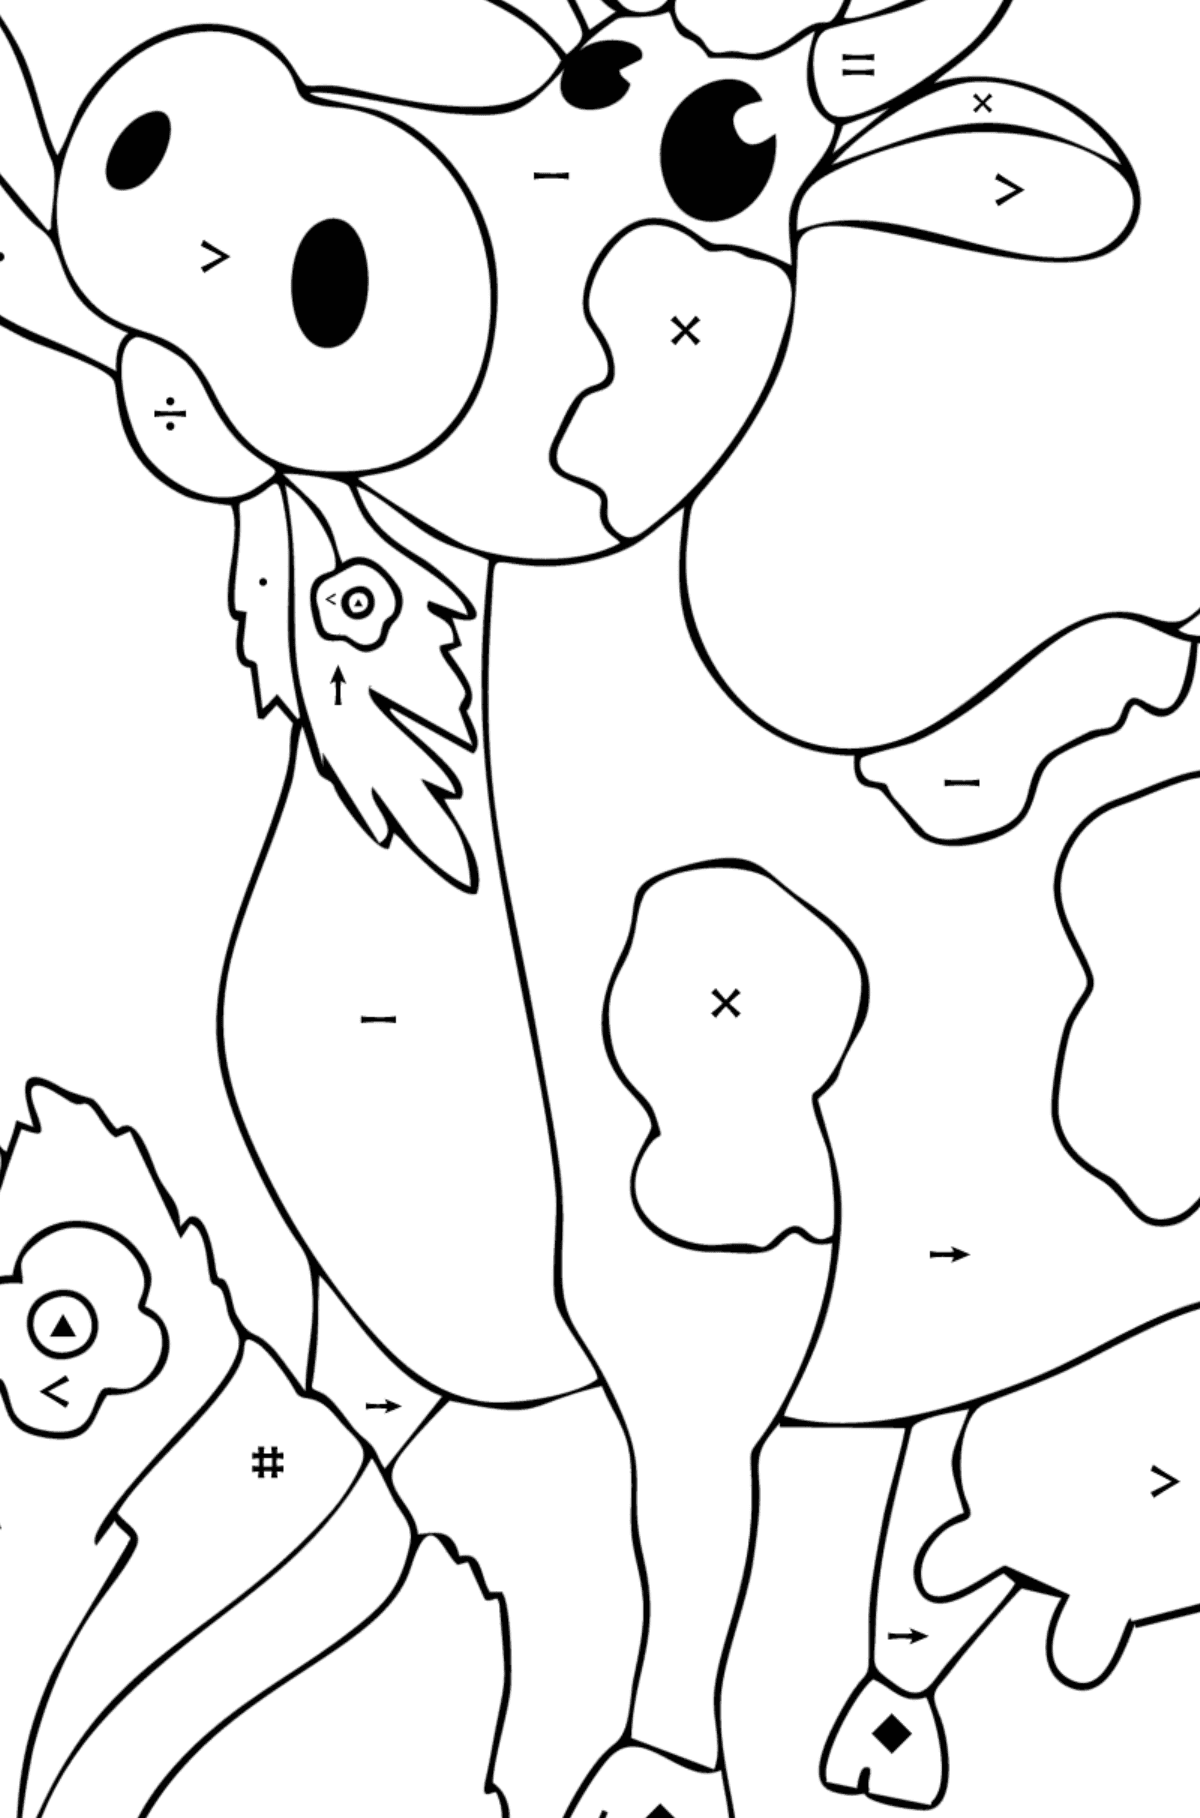 Coloring page Cow with hay - Coloring by Symbols for Kids